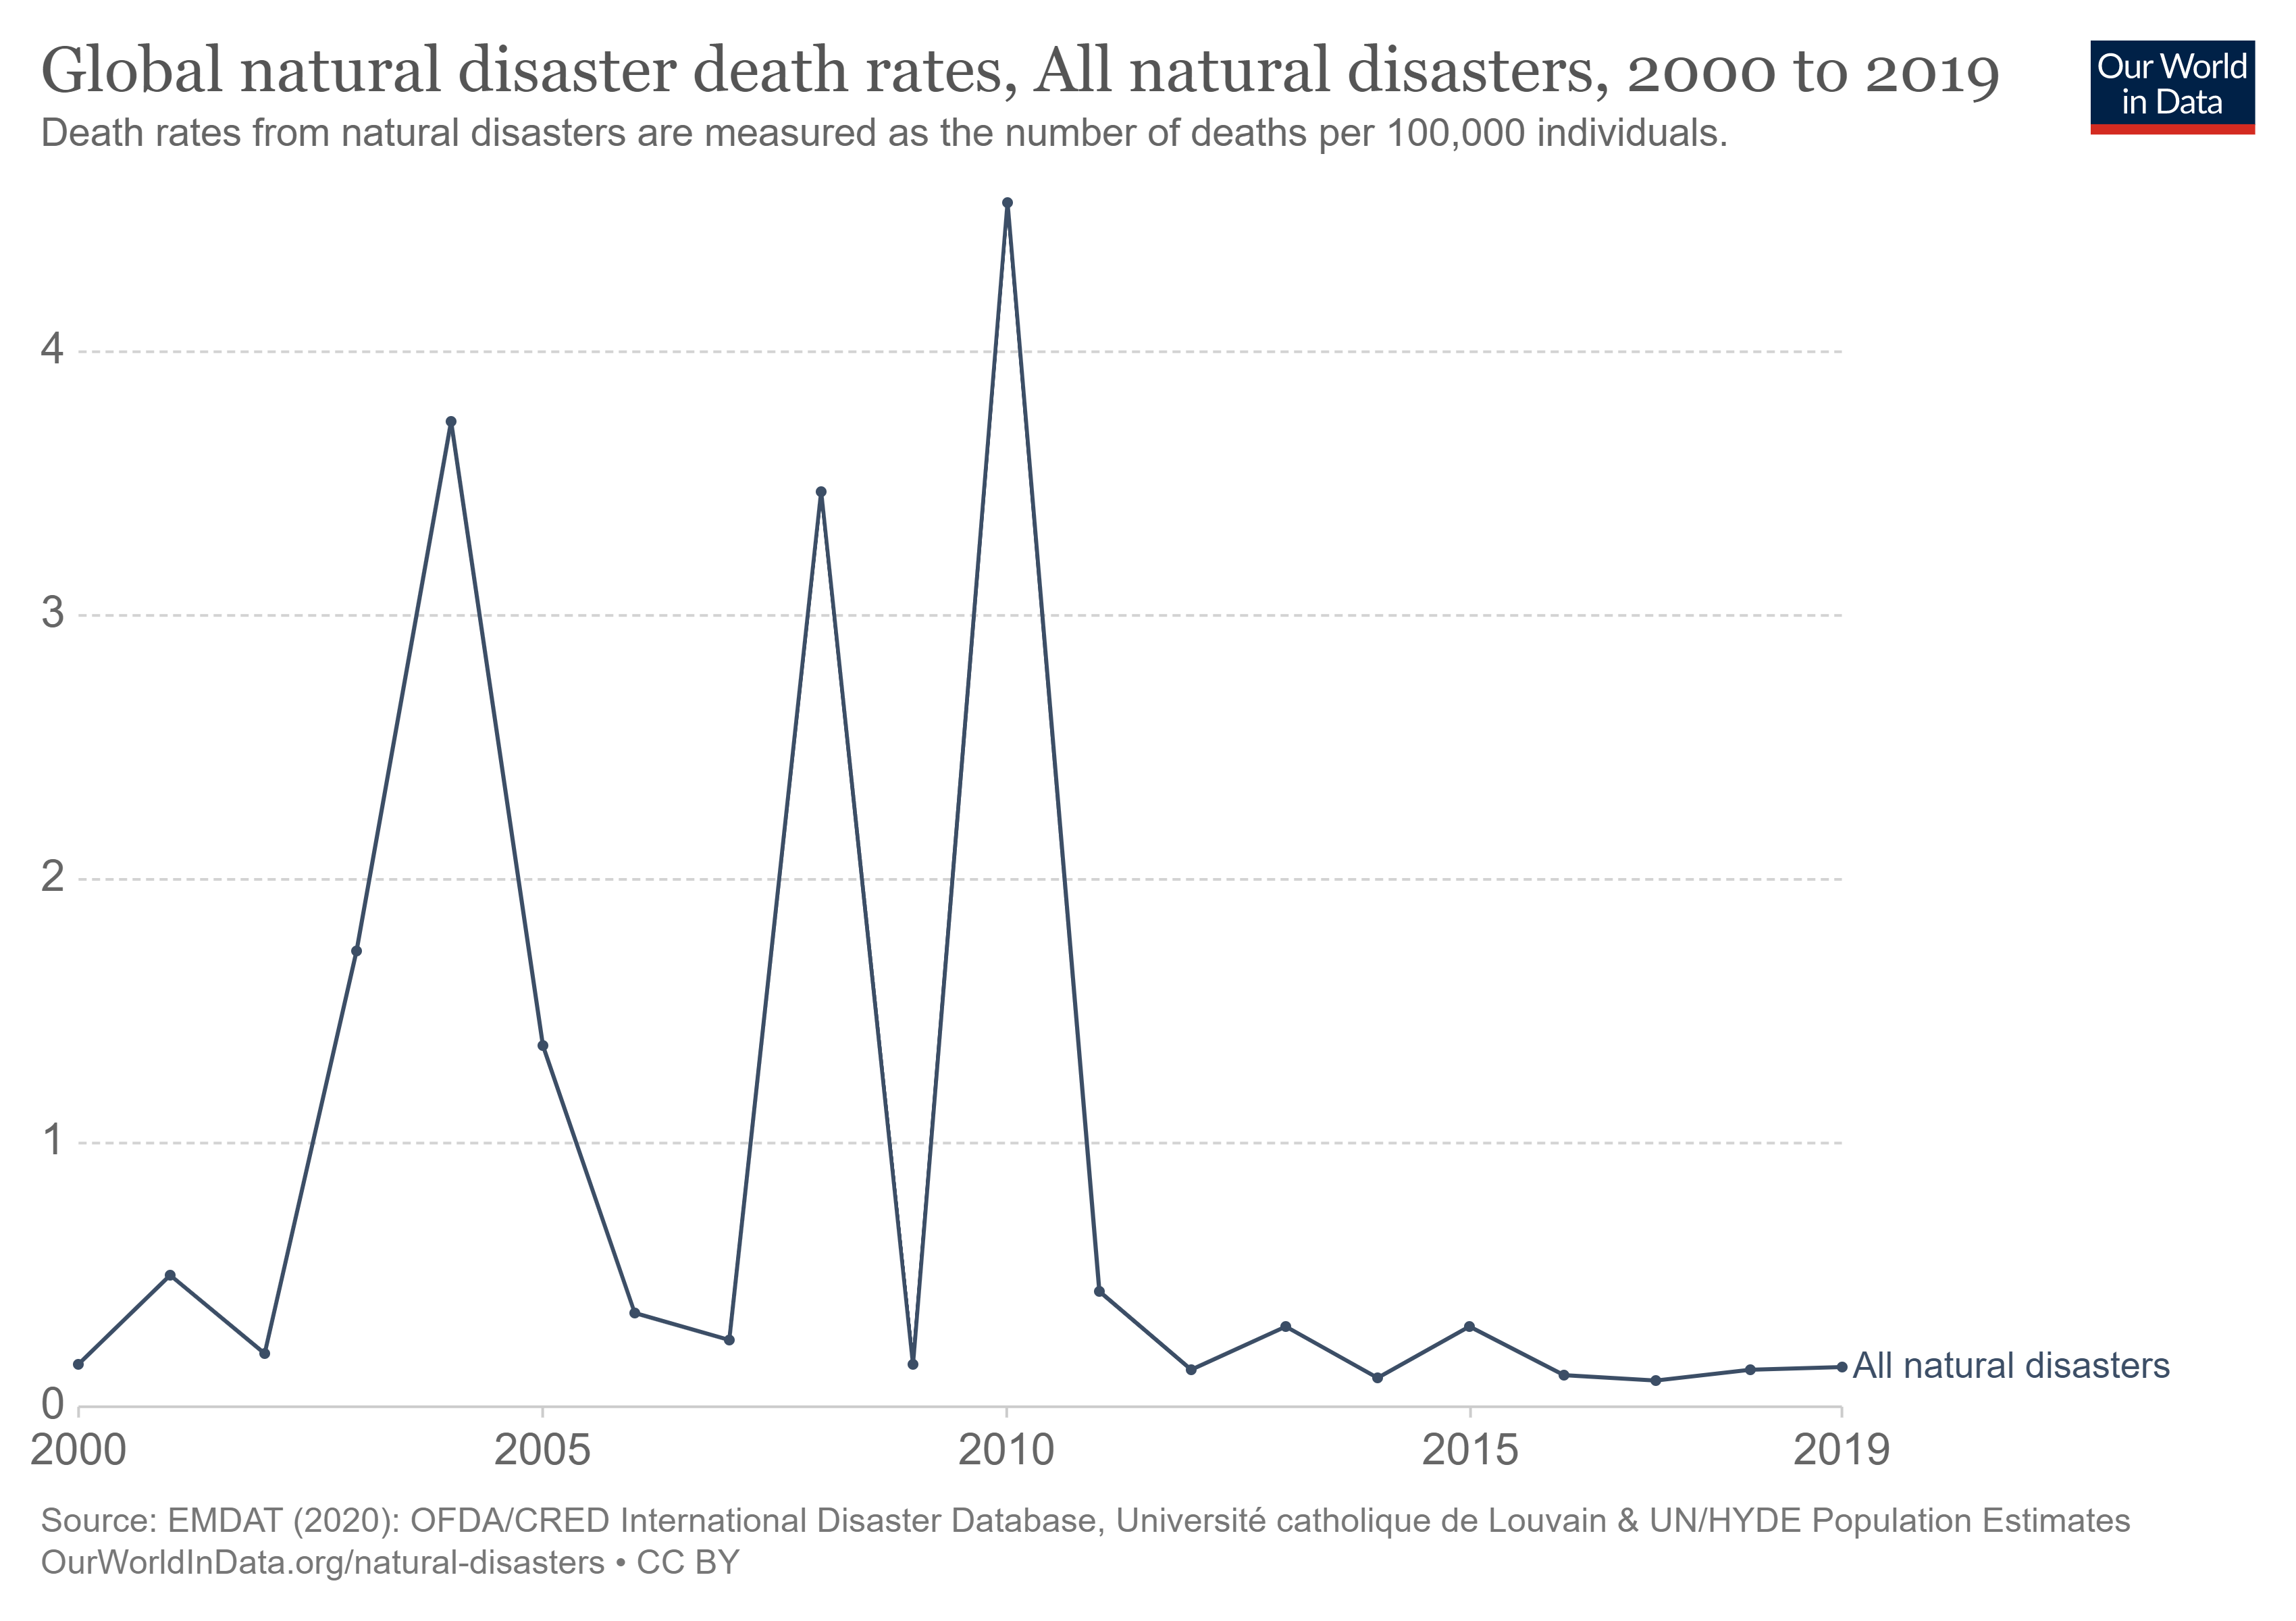 line graph showing global death rate due to natural disasters from 2000 to 2019. Source, our world in data. there are several sharp ups and downs in the graph. death rate peaked once around 2004, then again around 2008, then attained highest peak in 2010. there is a huge decline in the death rate since.